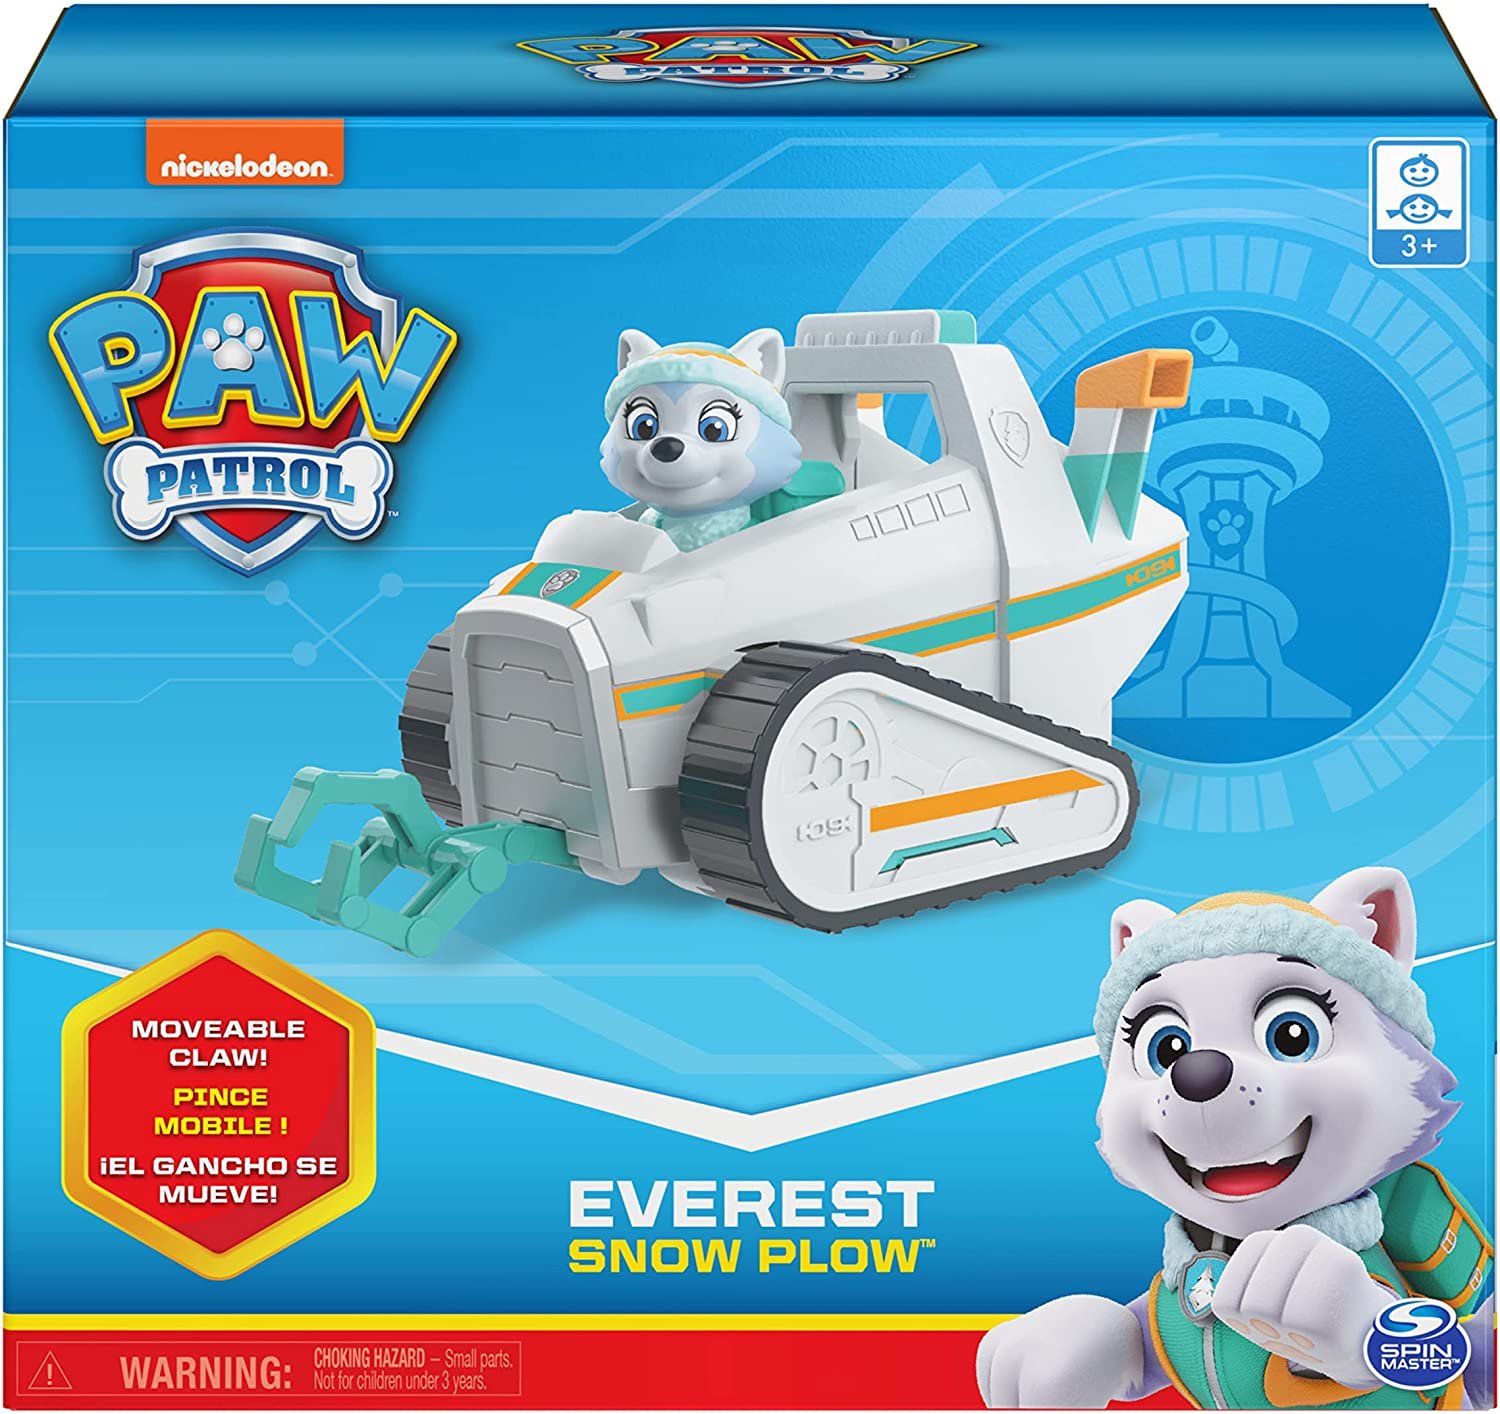 PAW Patrol, Everestâ€™s Snow Plow Vehicle with Collectible Figure, for Kids Aged 3 and Up - image 2 of 9